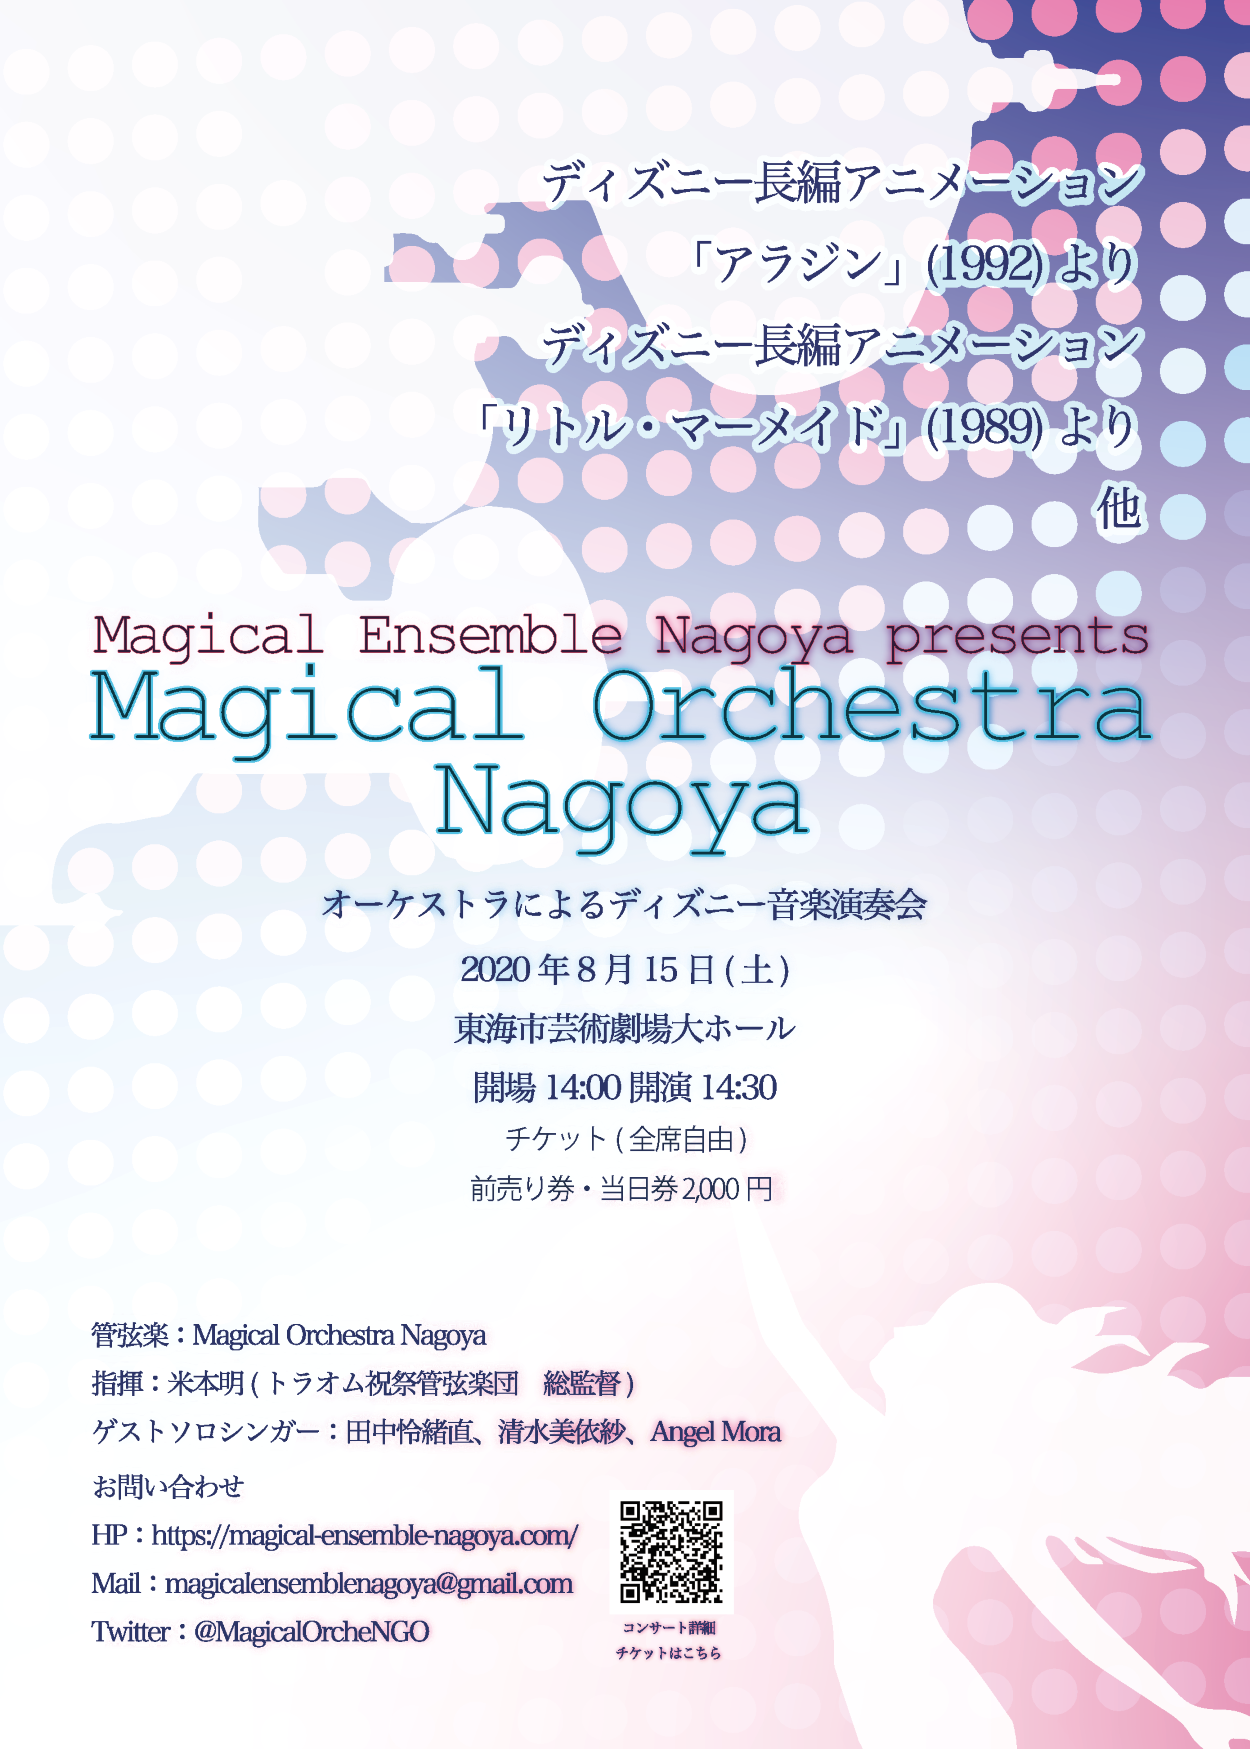 Magical Orchestra Nagoya 演奏会のチケット情報 予約 購入 販売 ライヴポケット